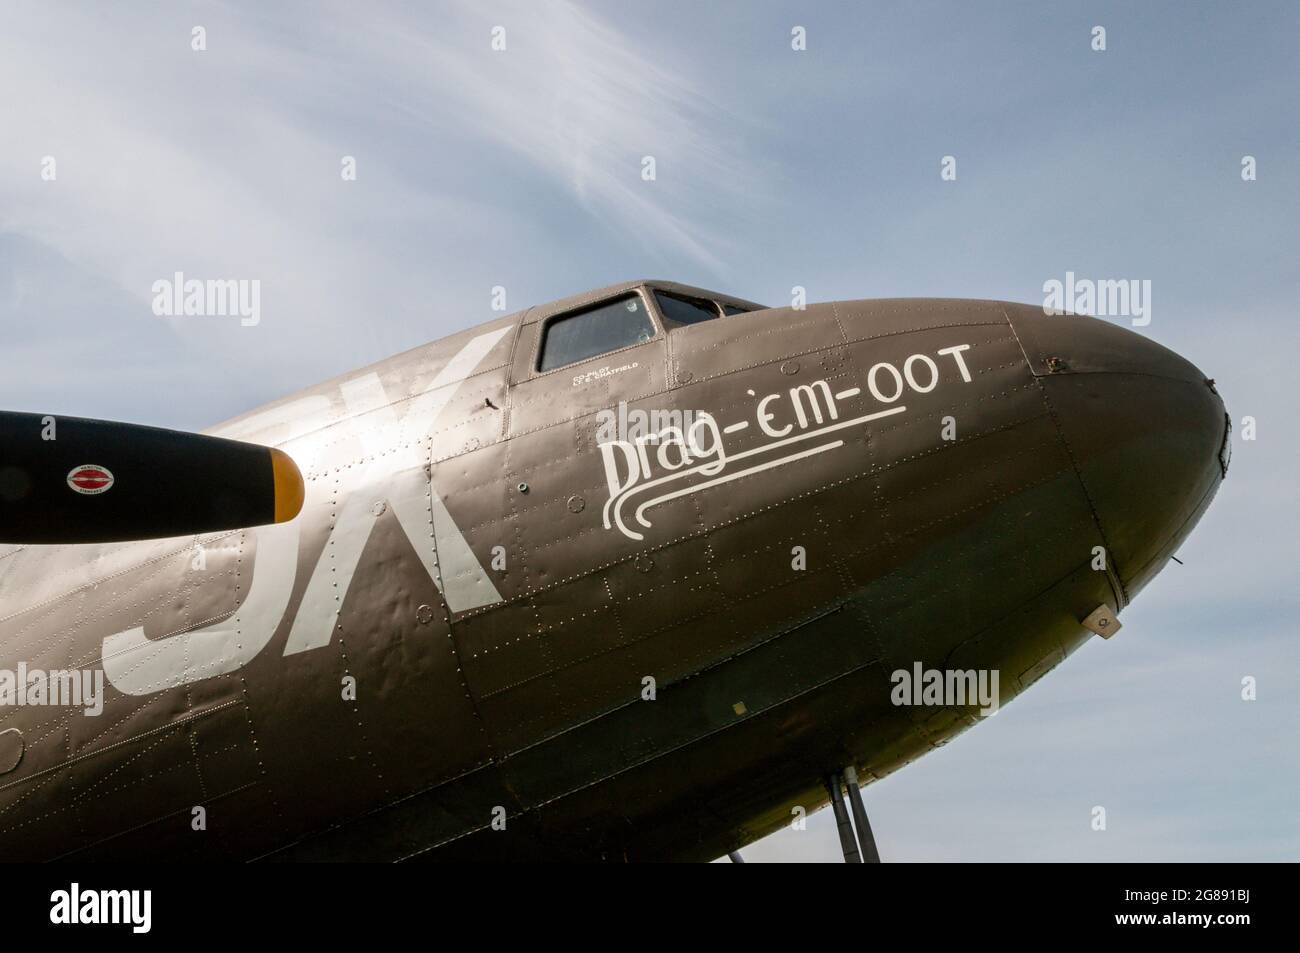 Douglas C-47 Skytrain, Dakota named Drag em oot. D-Day veteran served with US Army Air Force dropping paratroopers at St Mere Eglise near Normandy Stock Photo